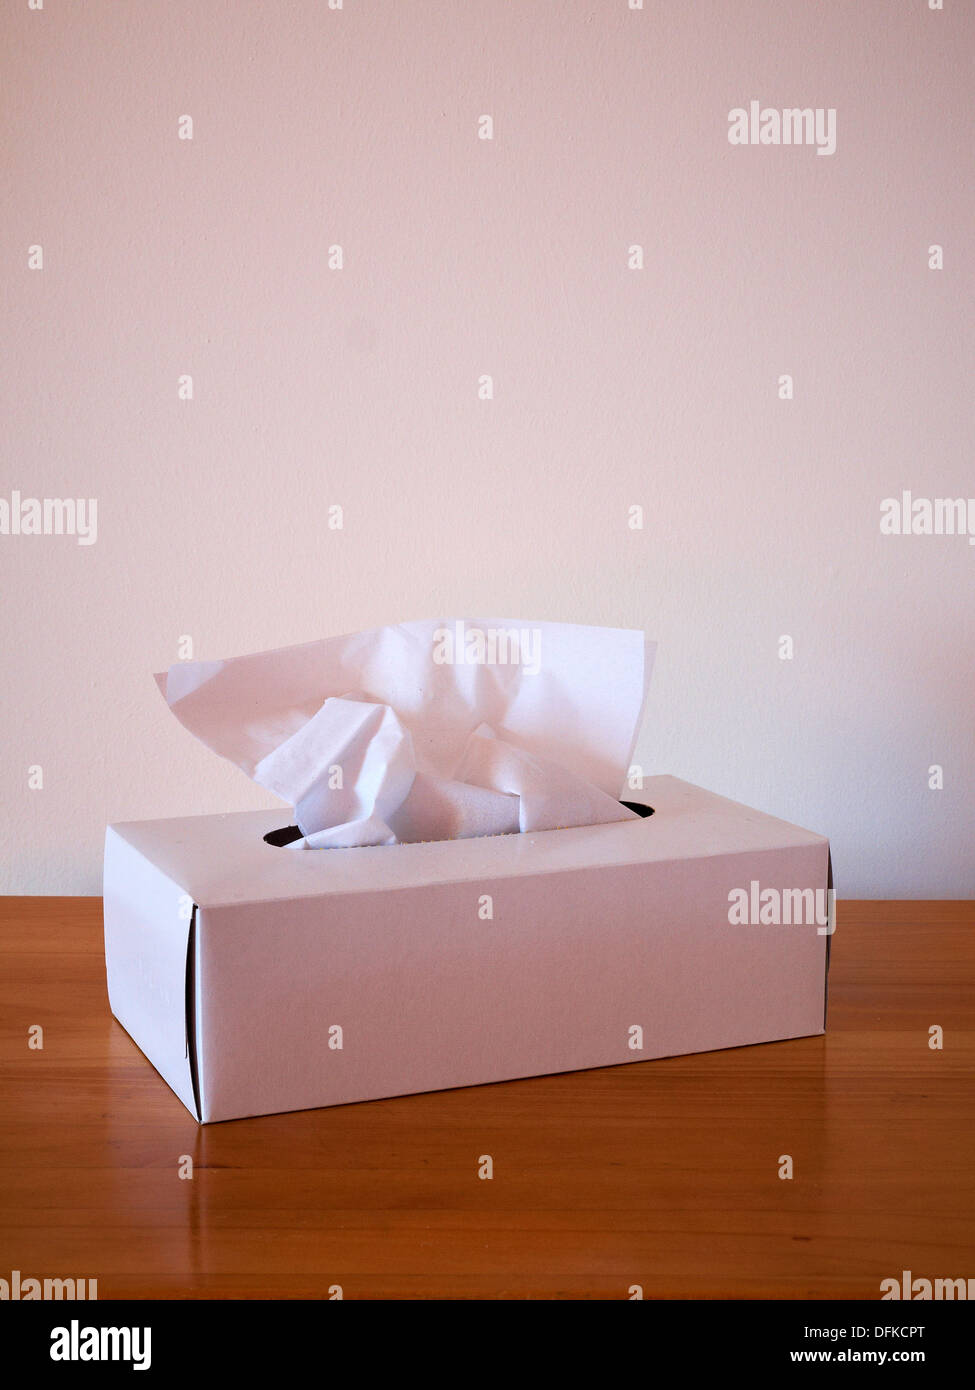 Box of paper tissues Stock Photo